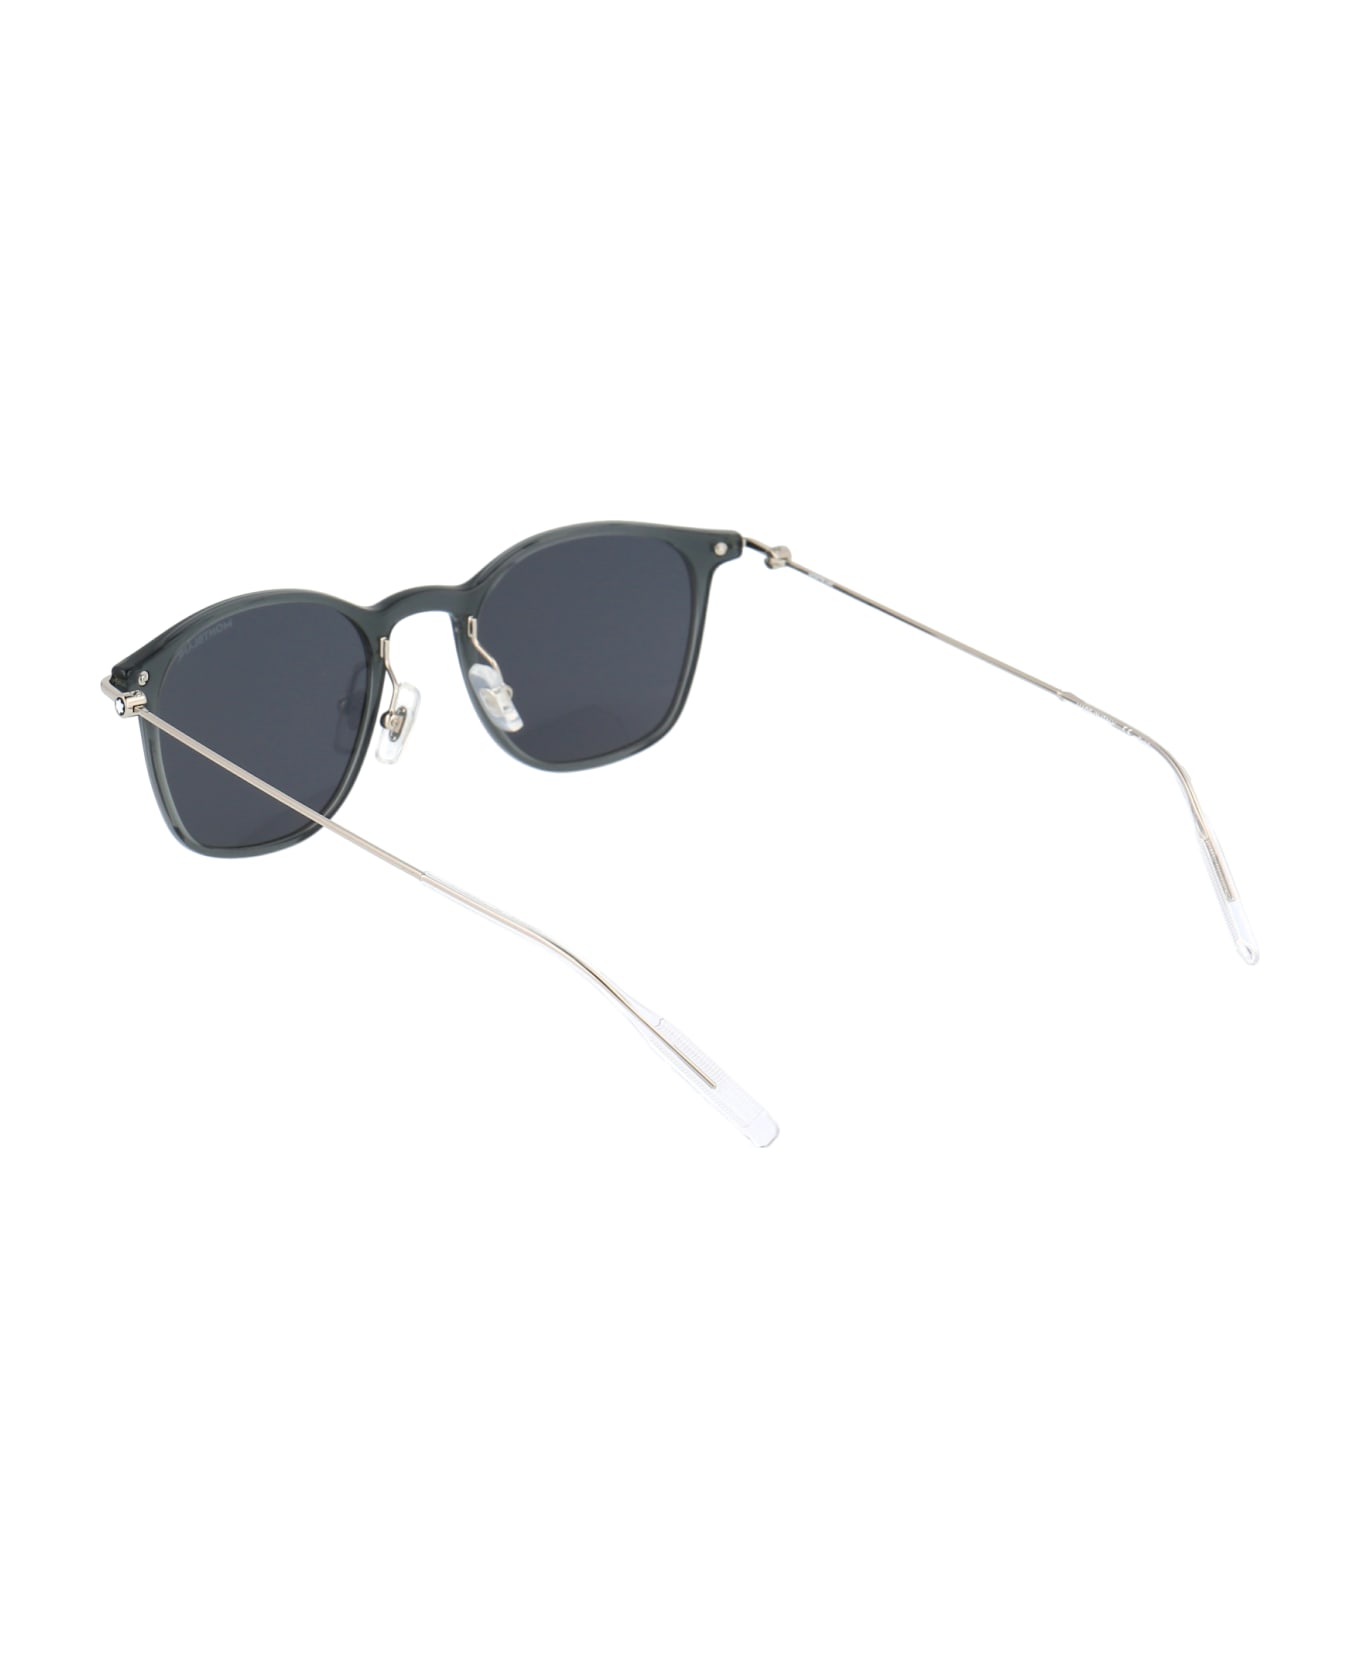 Montblanc Mb0098s Sunglasses - 001 GREY SILVER GREY